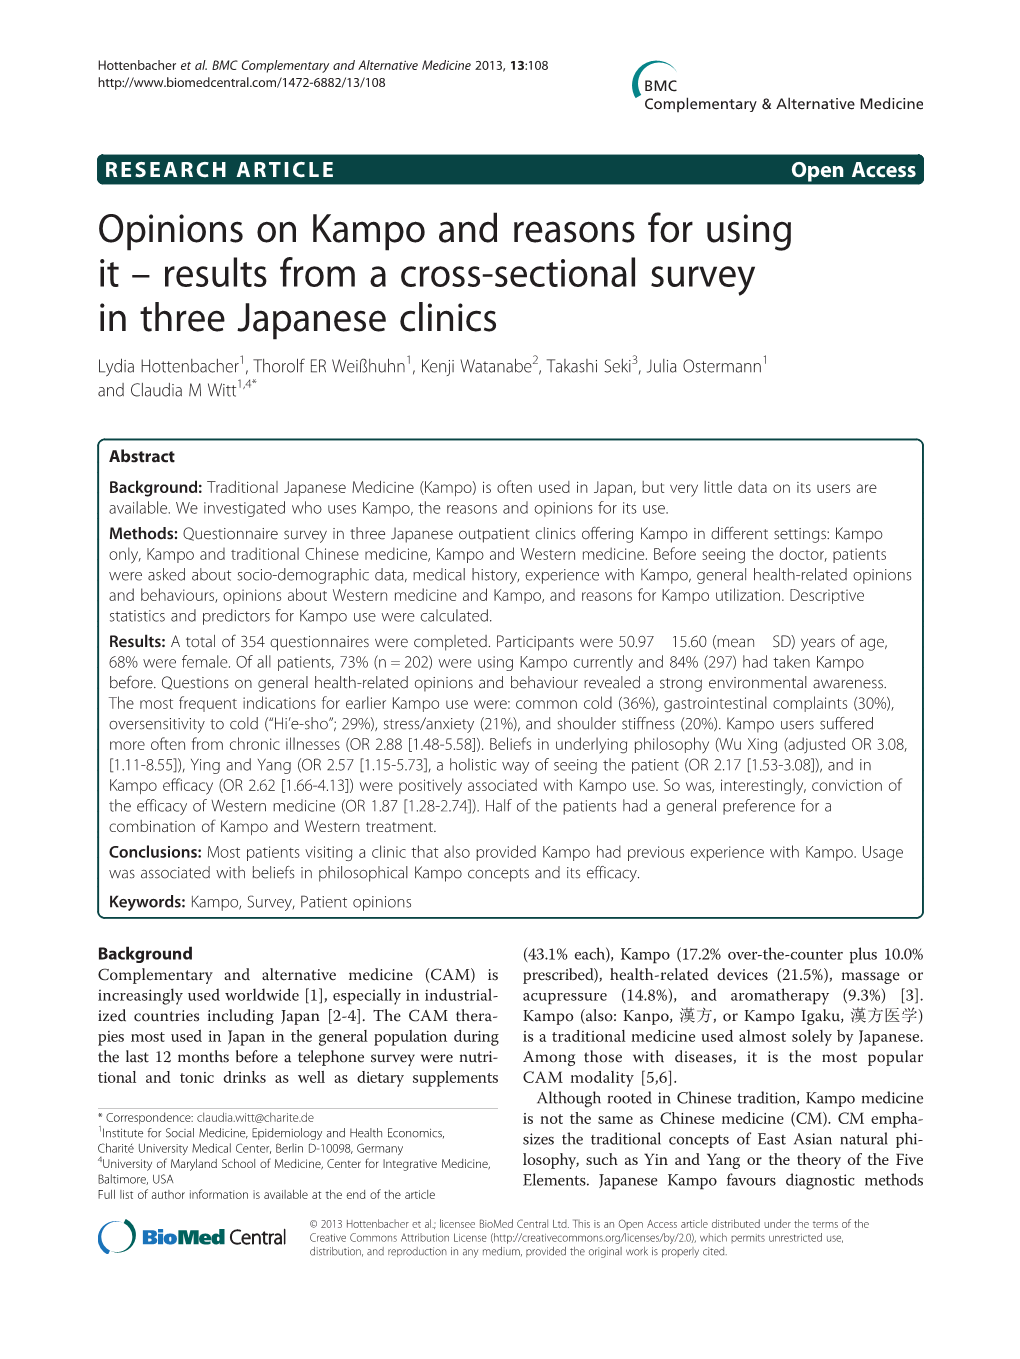 Results from a Cross-Sectional Survey in Three Japanese Clinics